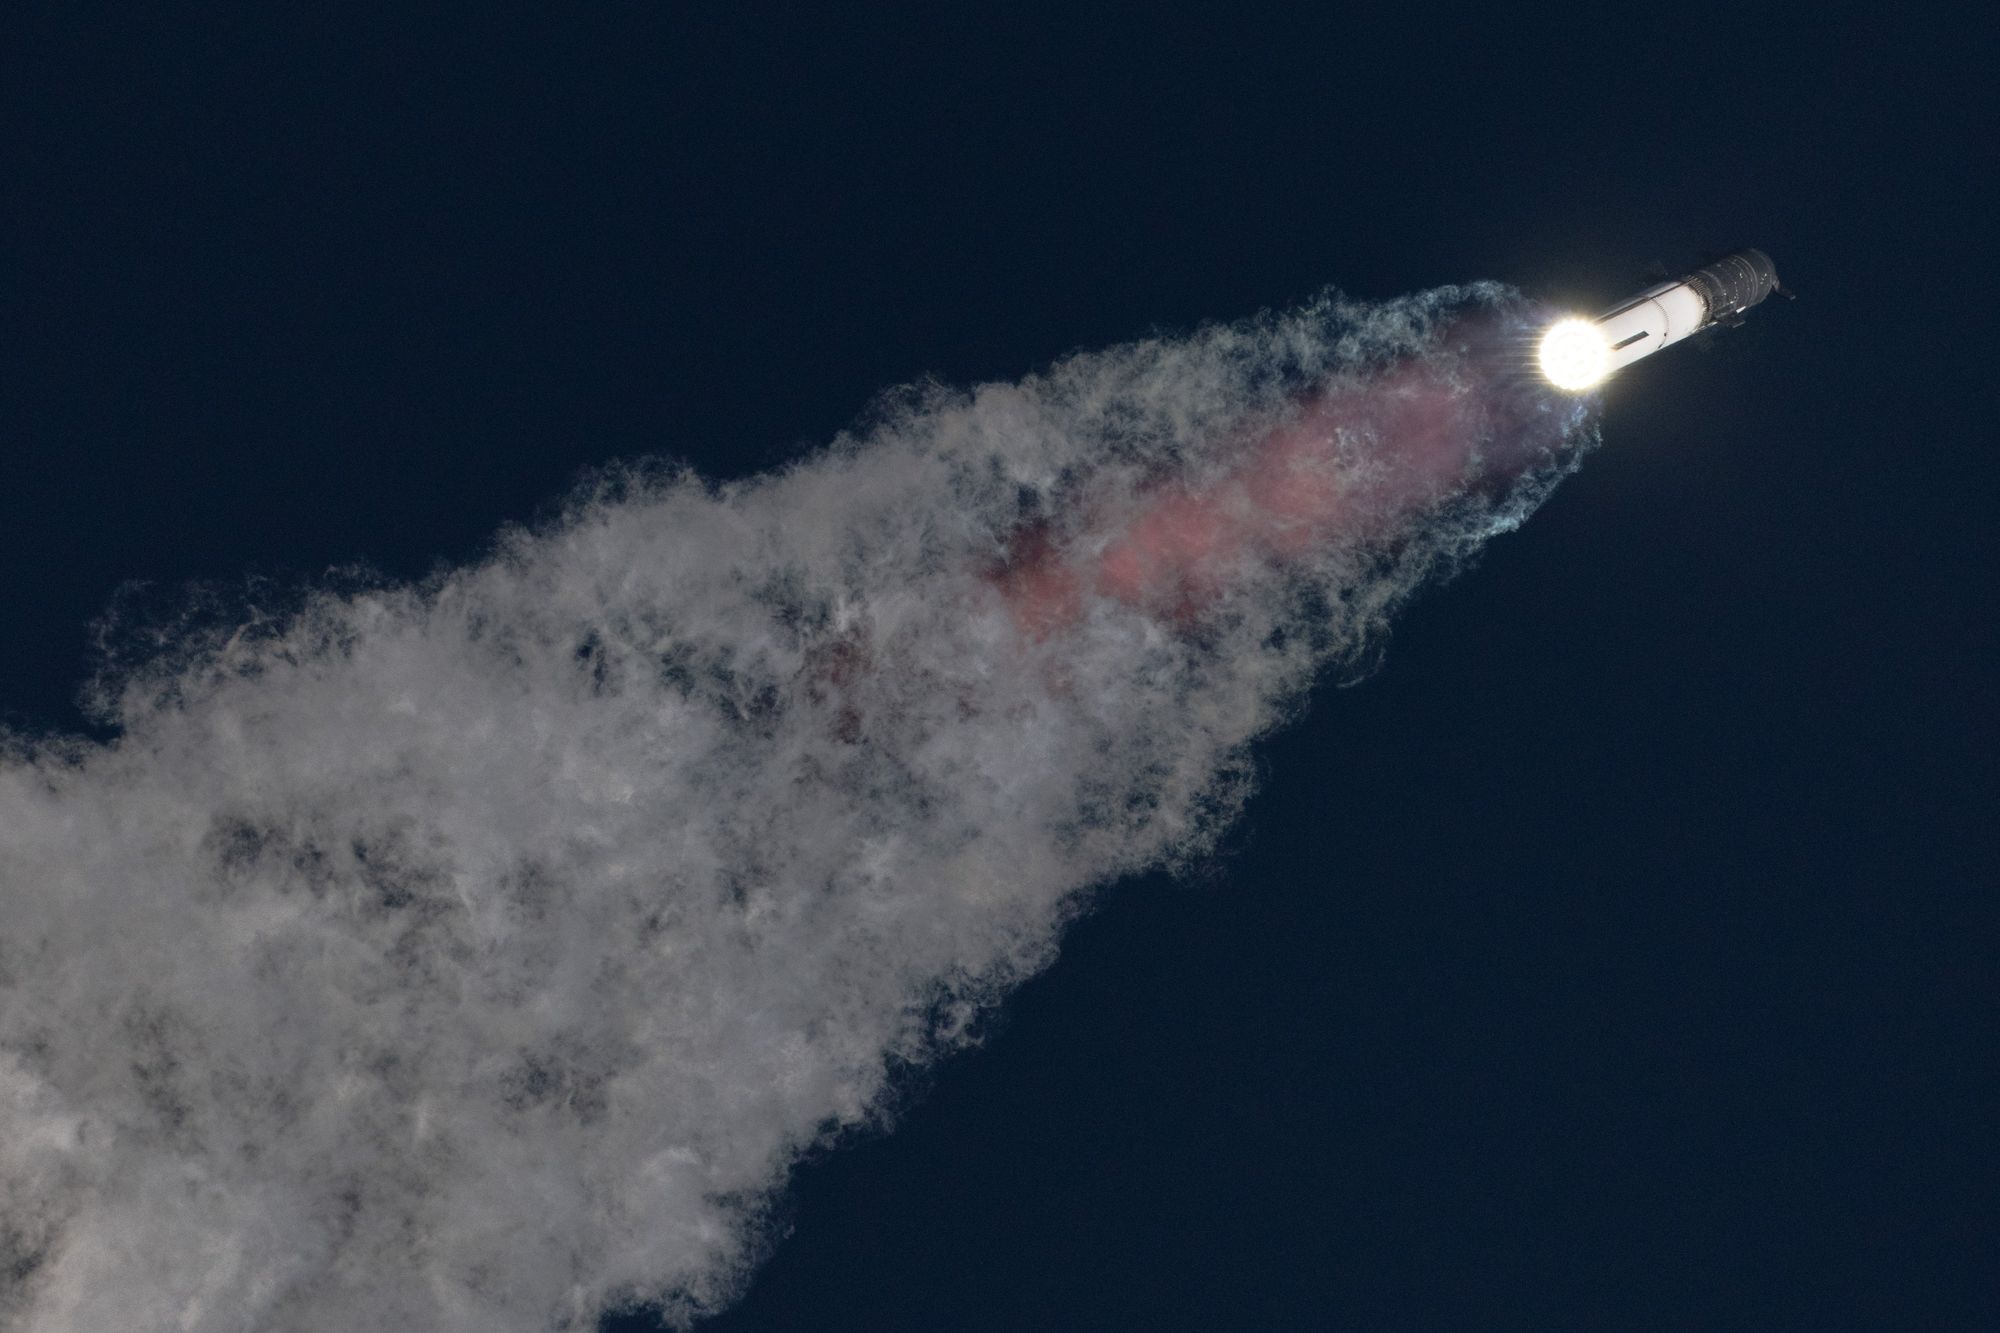 Starship-Super Heavy during first stage flight with Ship 25 and Booster 9. ©SpaceX